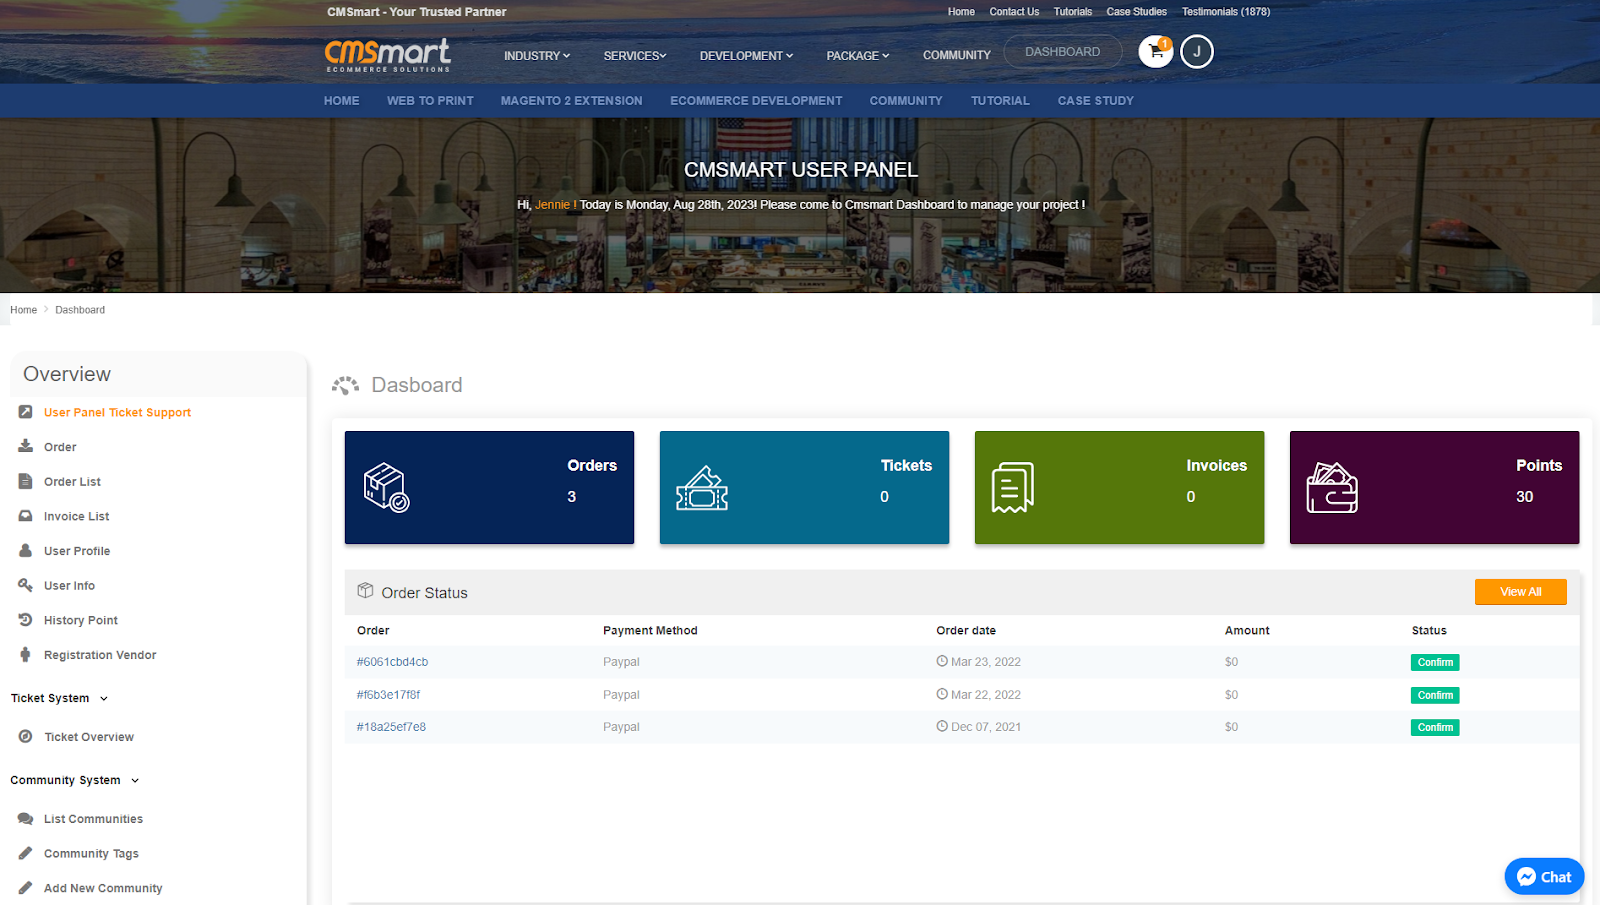 Implementing Vendor Dashboard and Management Tools on CMsmart Web